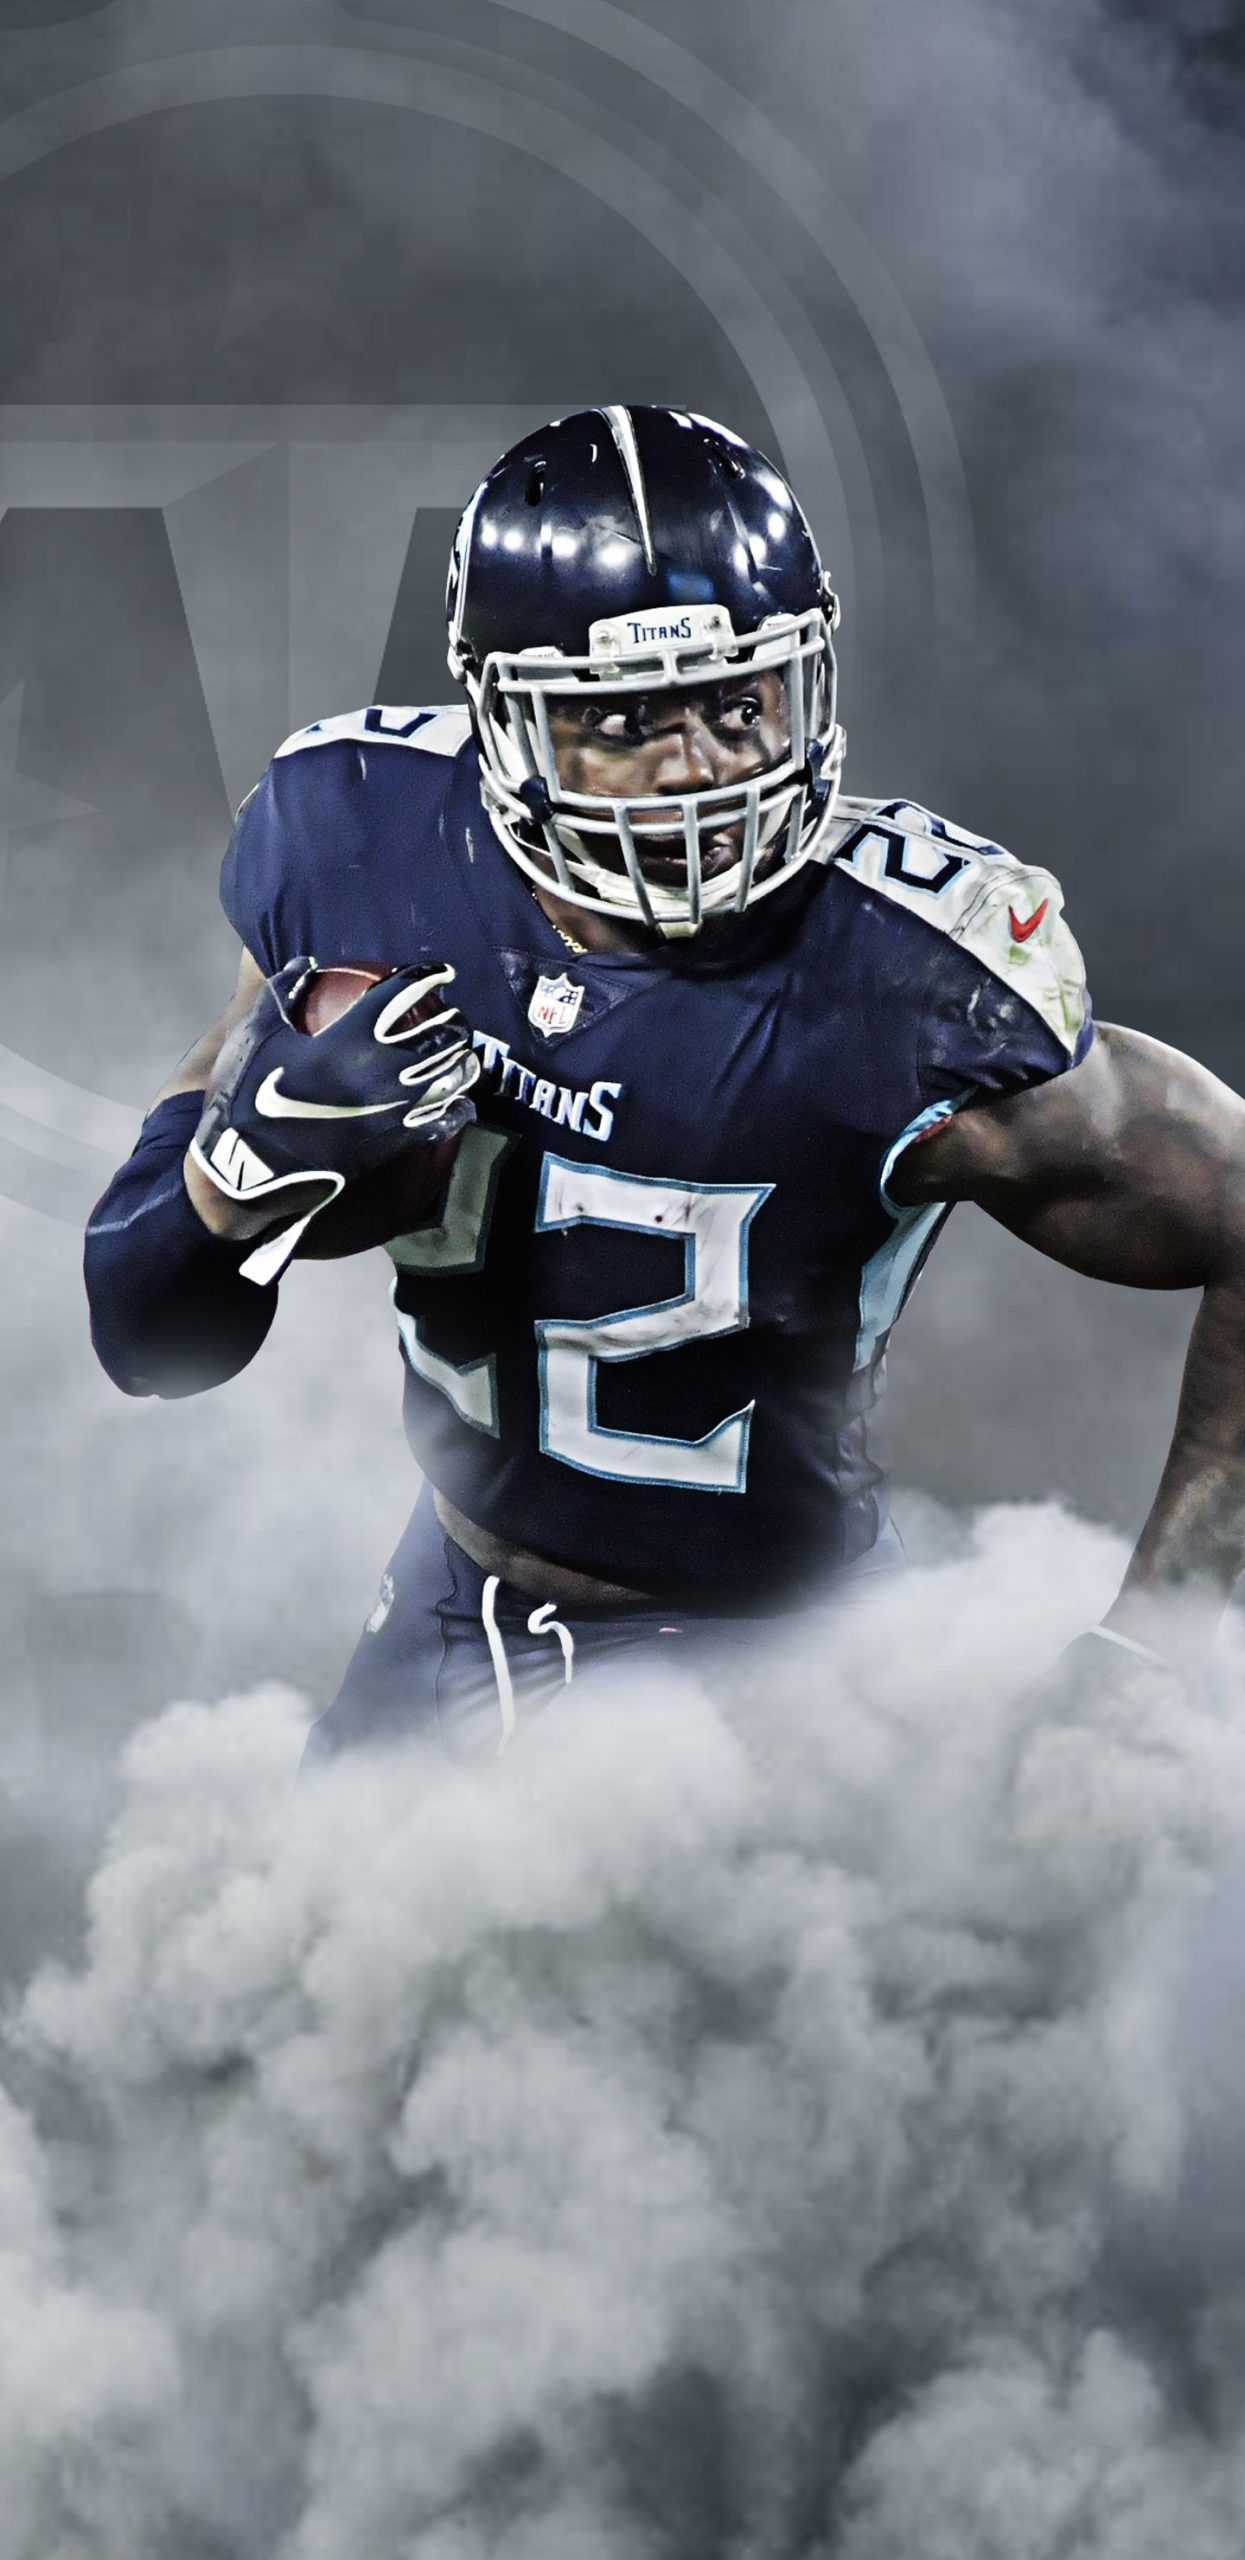 HD Derrick Henry Wallpaper Free Full HD Download, use for mobile and deskto...